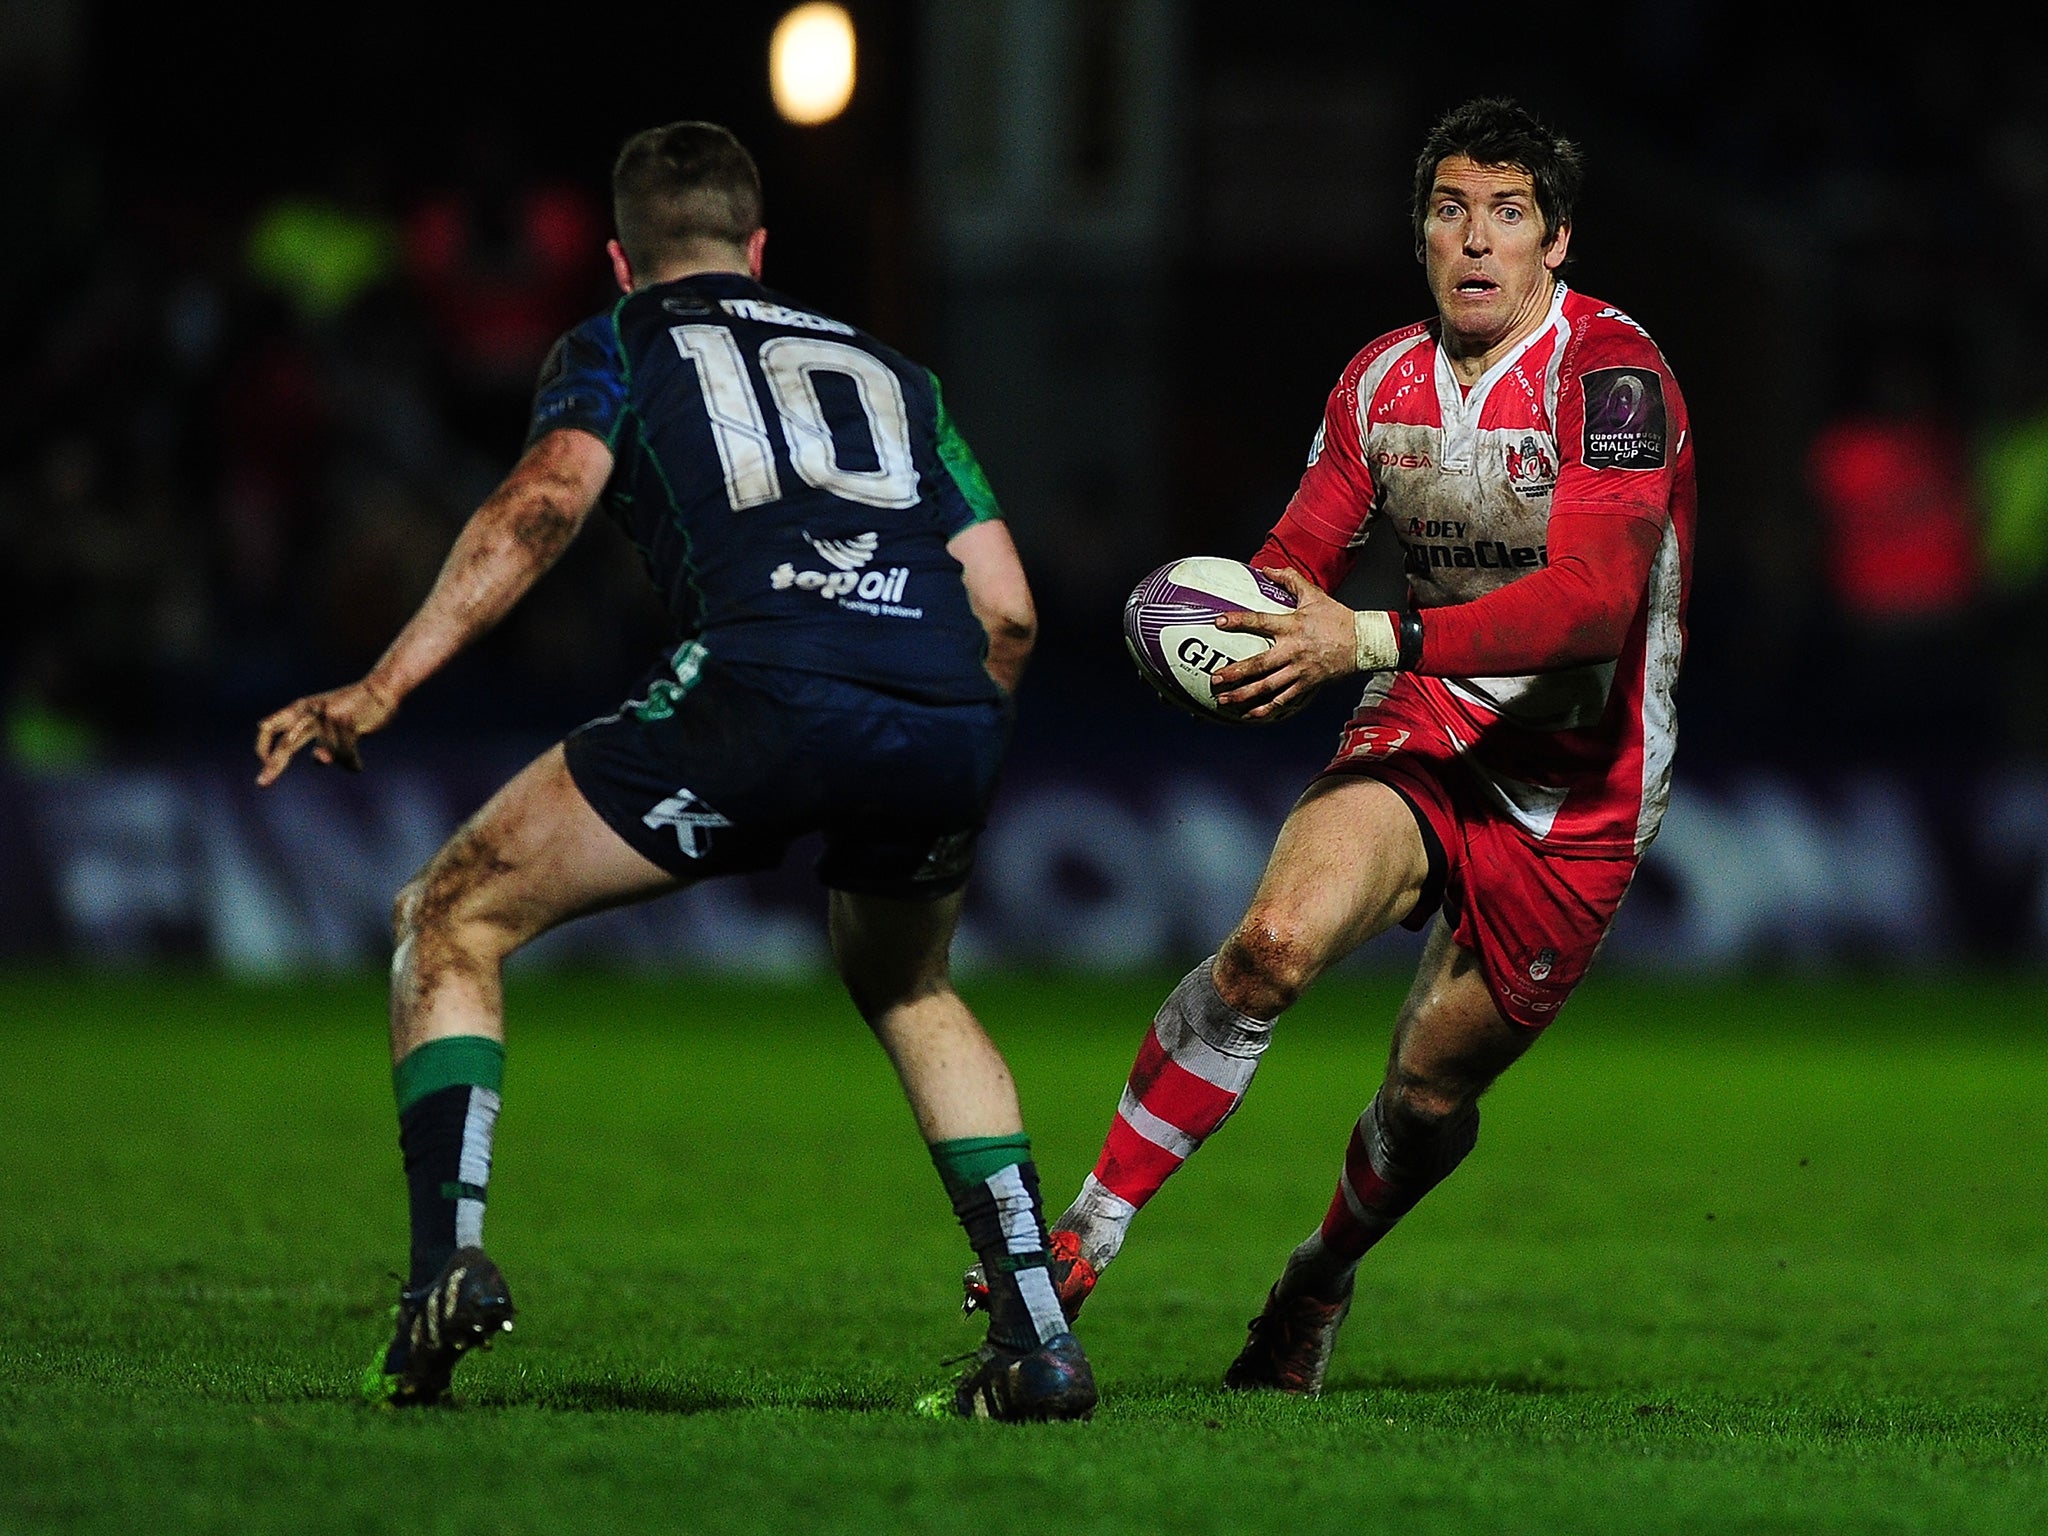 James Hook takes on Connacht's Jack Carty